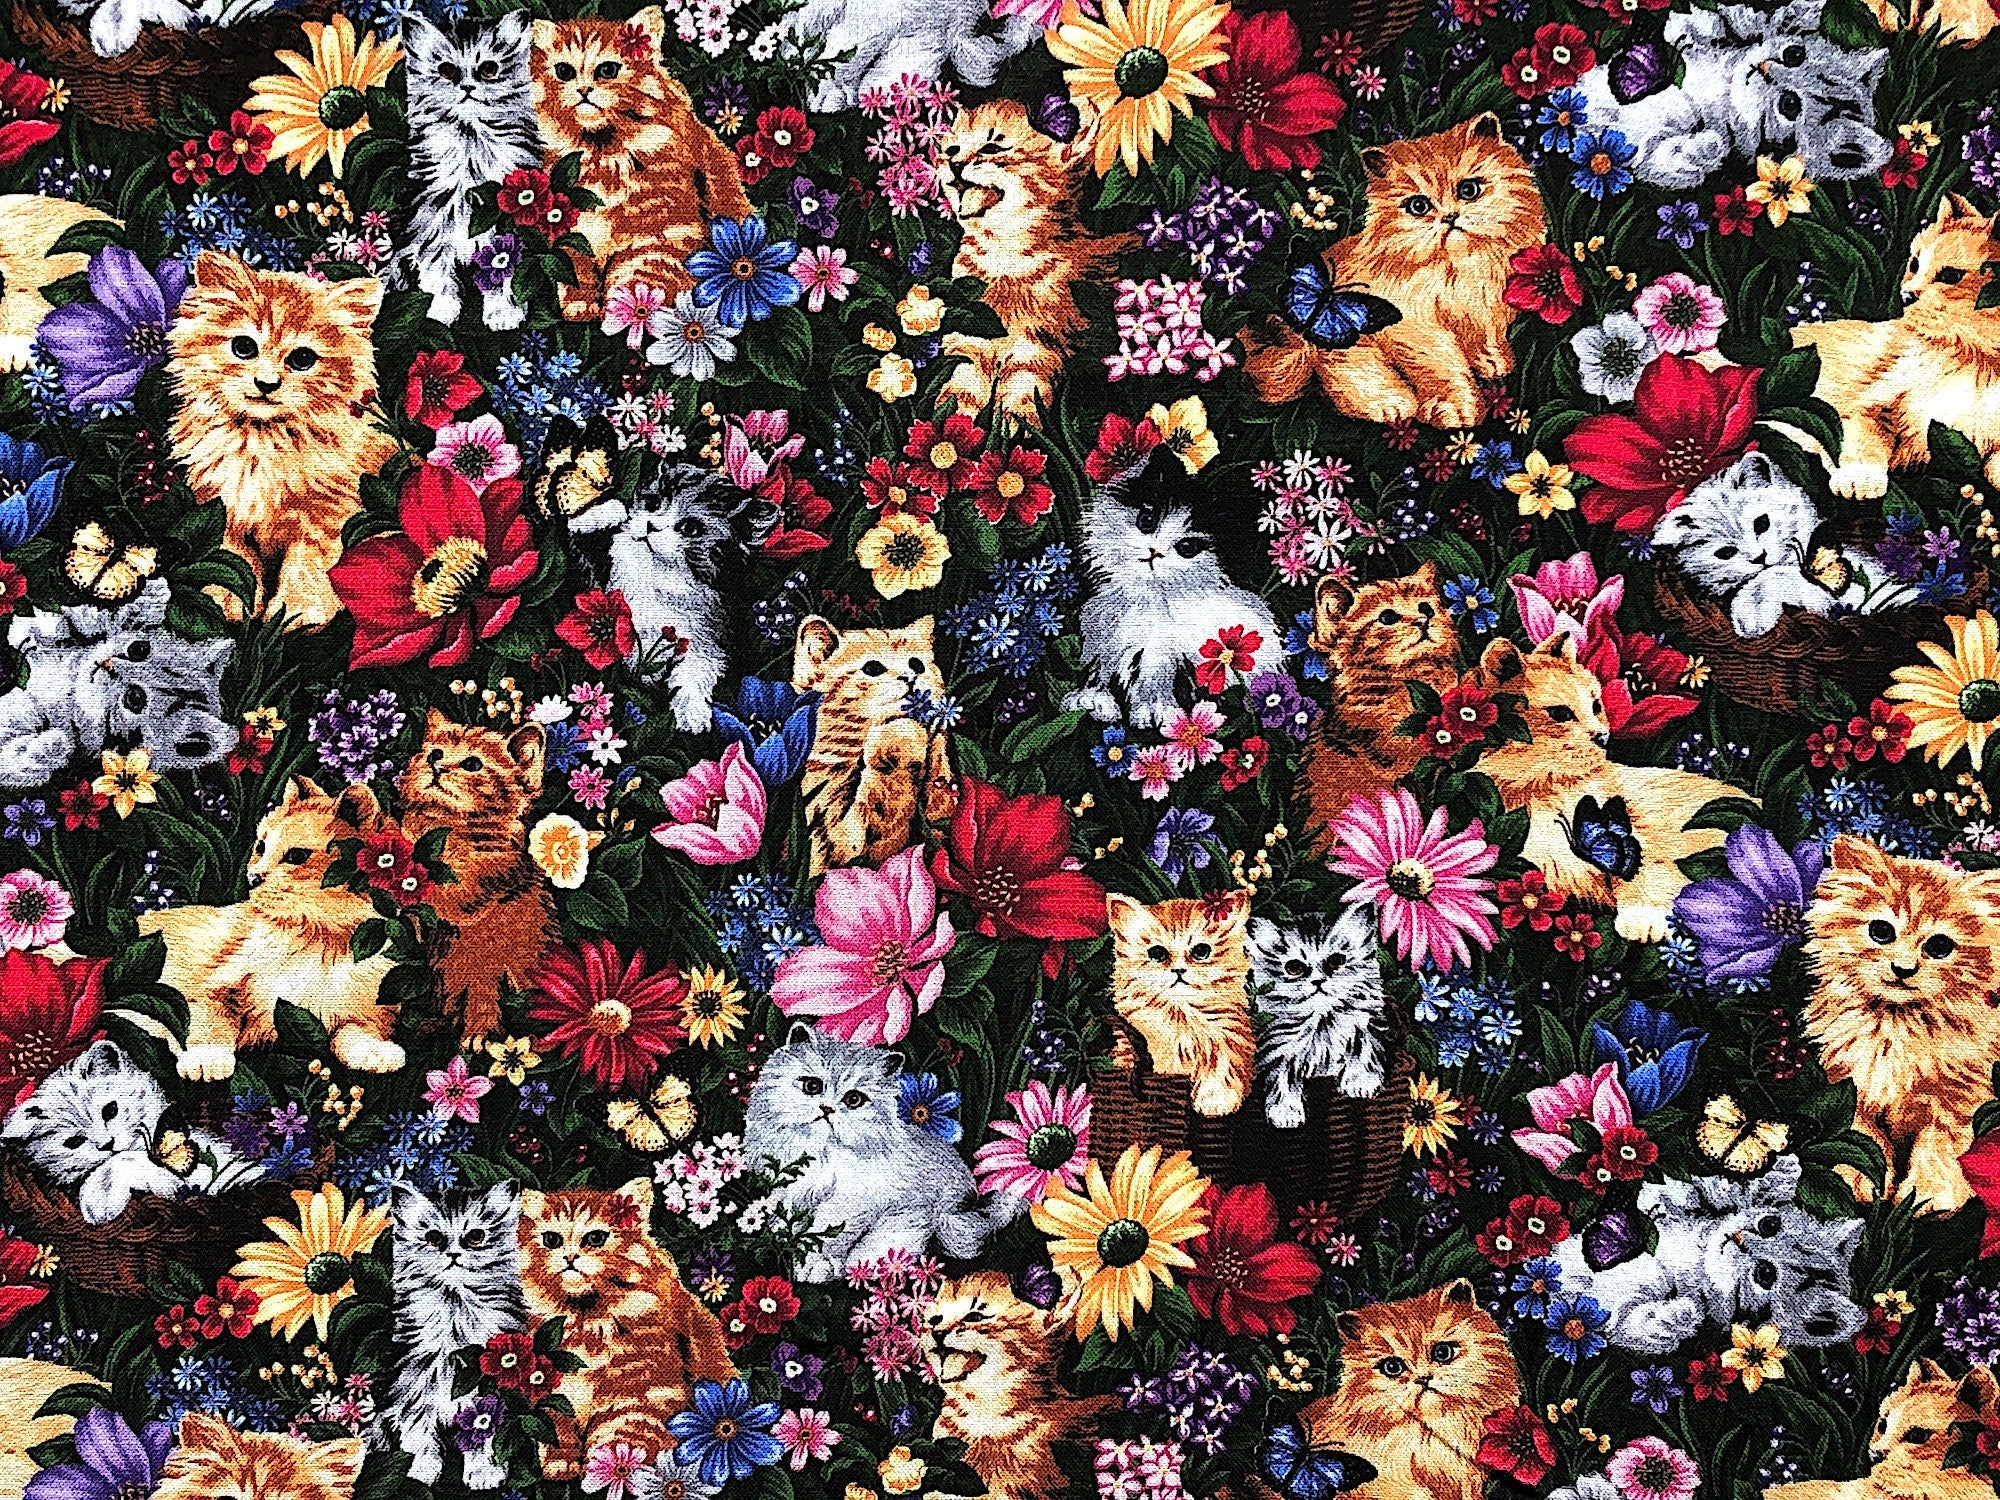 This fabric is covered with kittens, flowers and butterflies. The kittens are grey and beige tones. You will find blue, pink ,yellow and red flowers and blue and yellow butterflies. This fabric is called Purr-Fect Kittens in Flowers